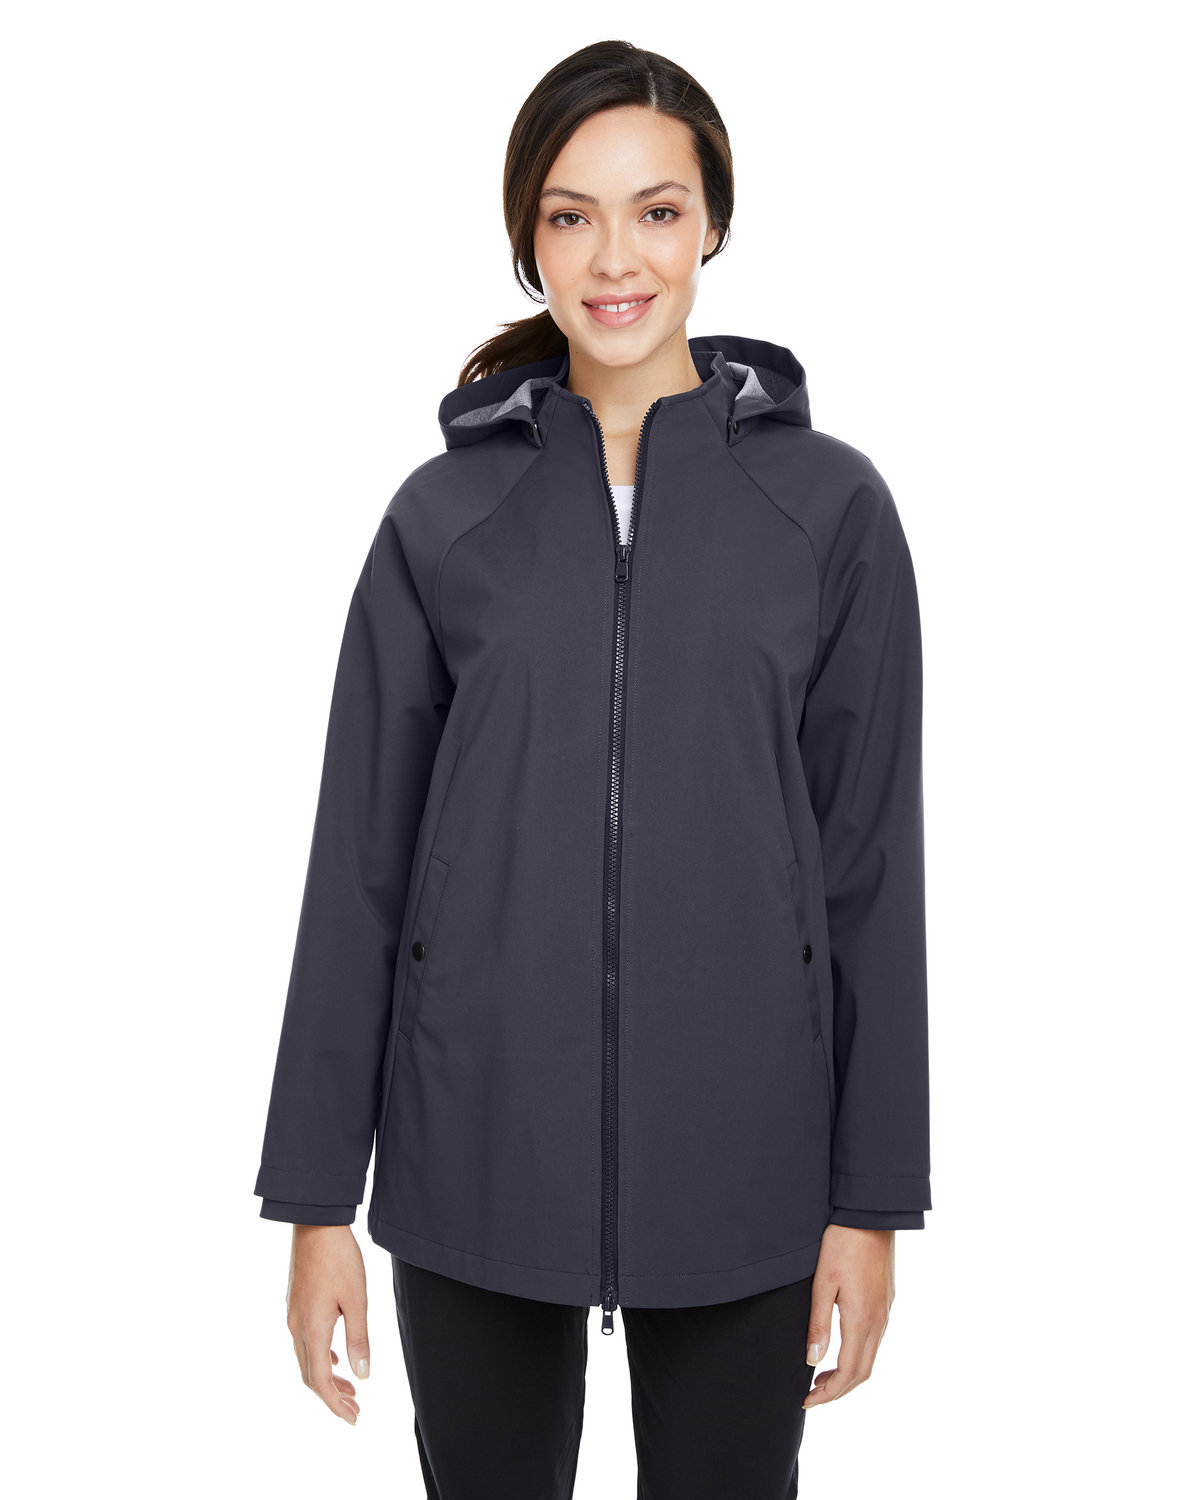 Ladies City Hybrid Soft Shell Hooded Jacket-North End